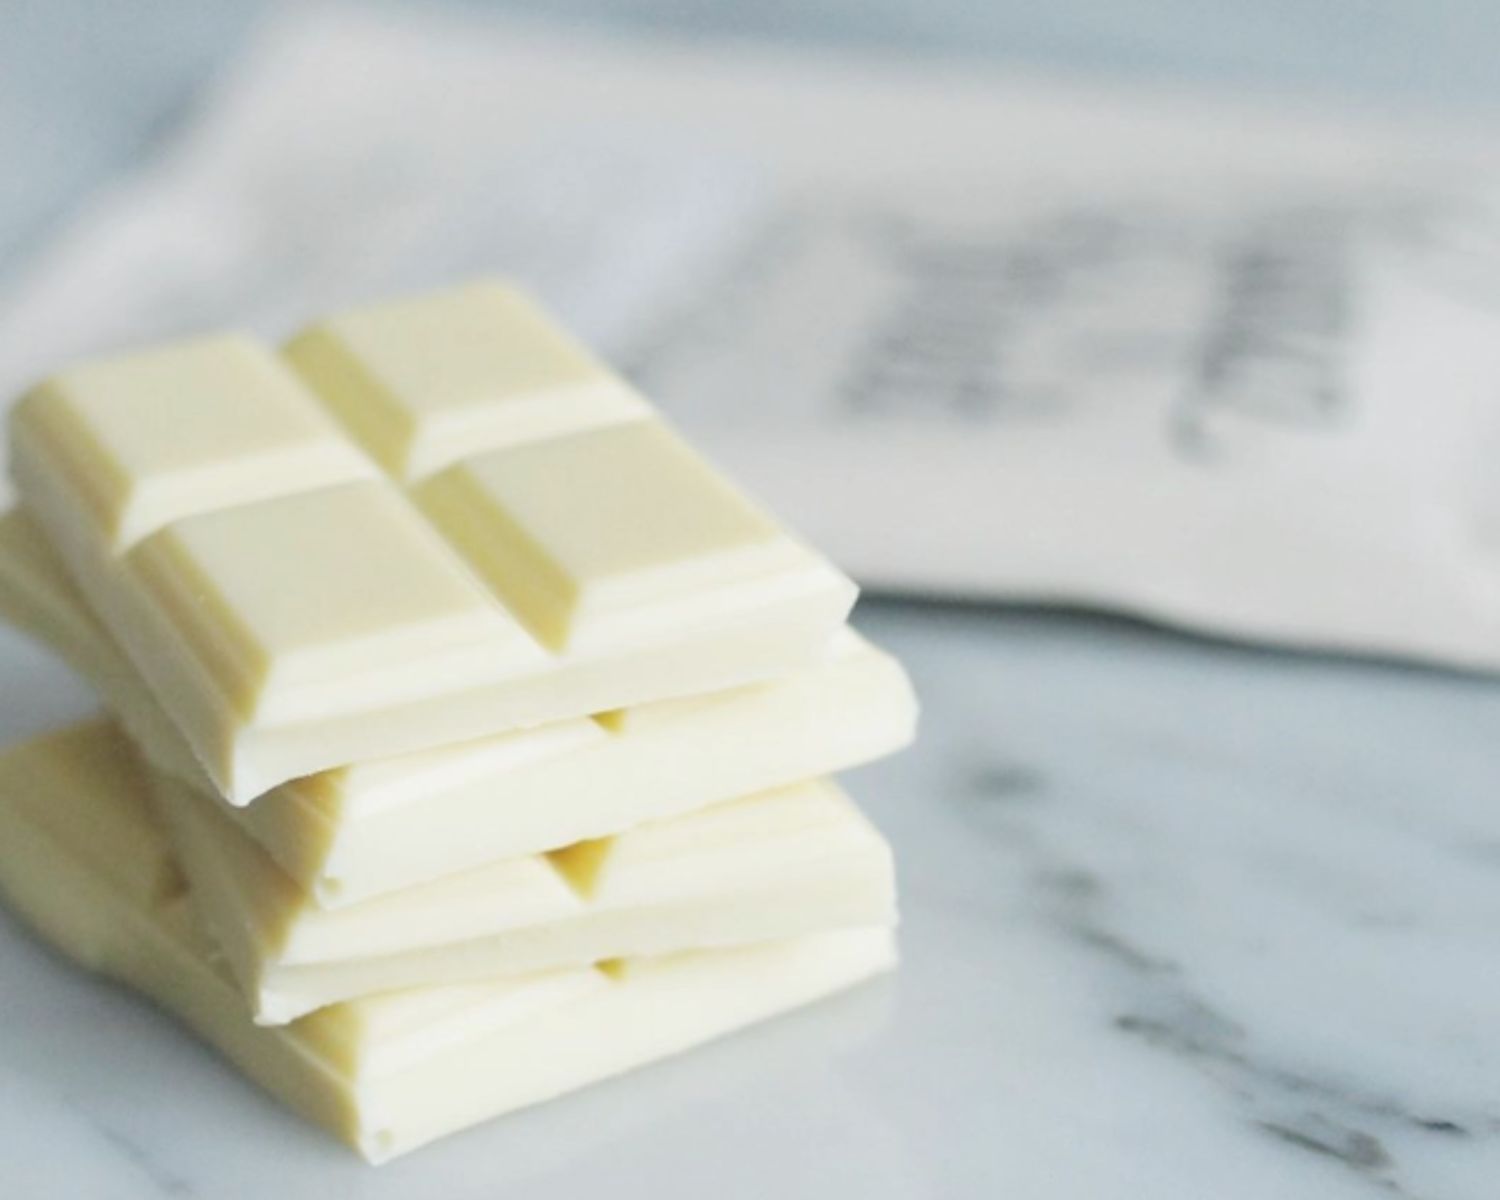 How is white chocolate made?